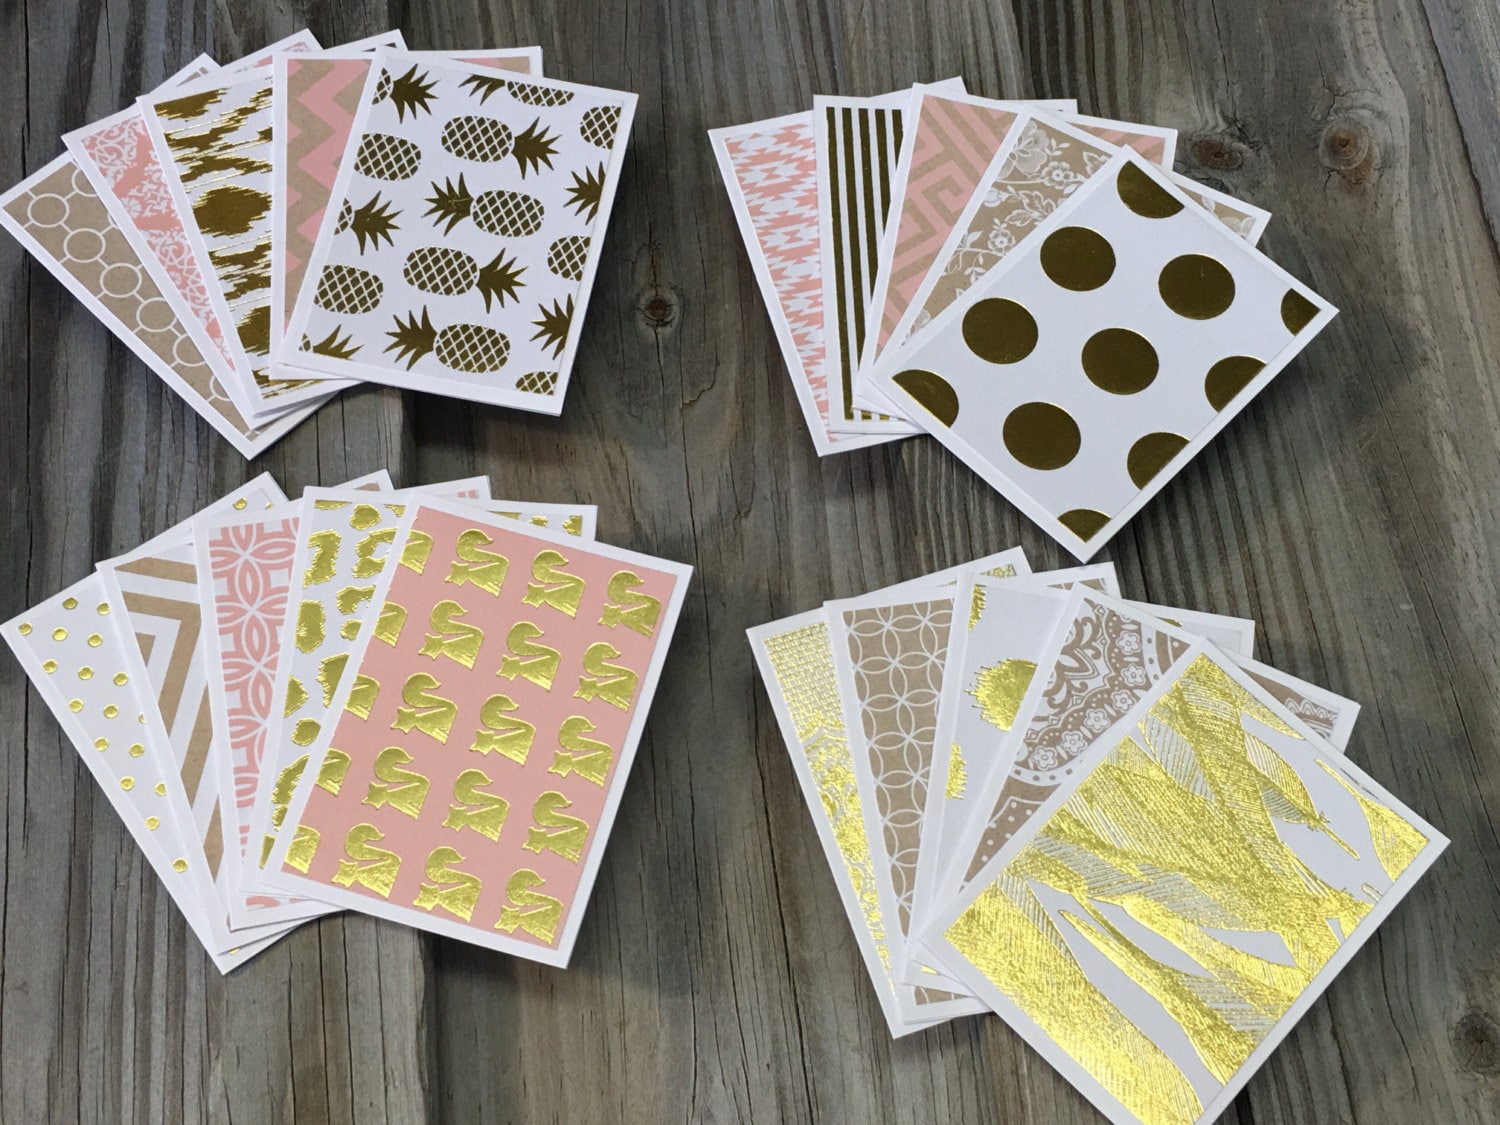 20-Assorted Gold Foil Blank Mini Note Cards (3 1/2x2 1/2) WITH  Envelopes-Matching Tags Also Available-Gift/Thank You Cards/Lunch Box Cards